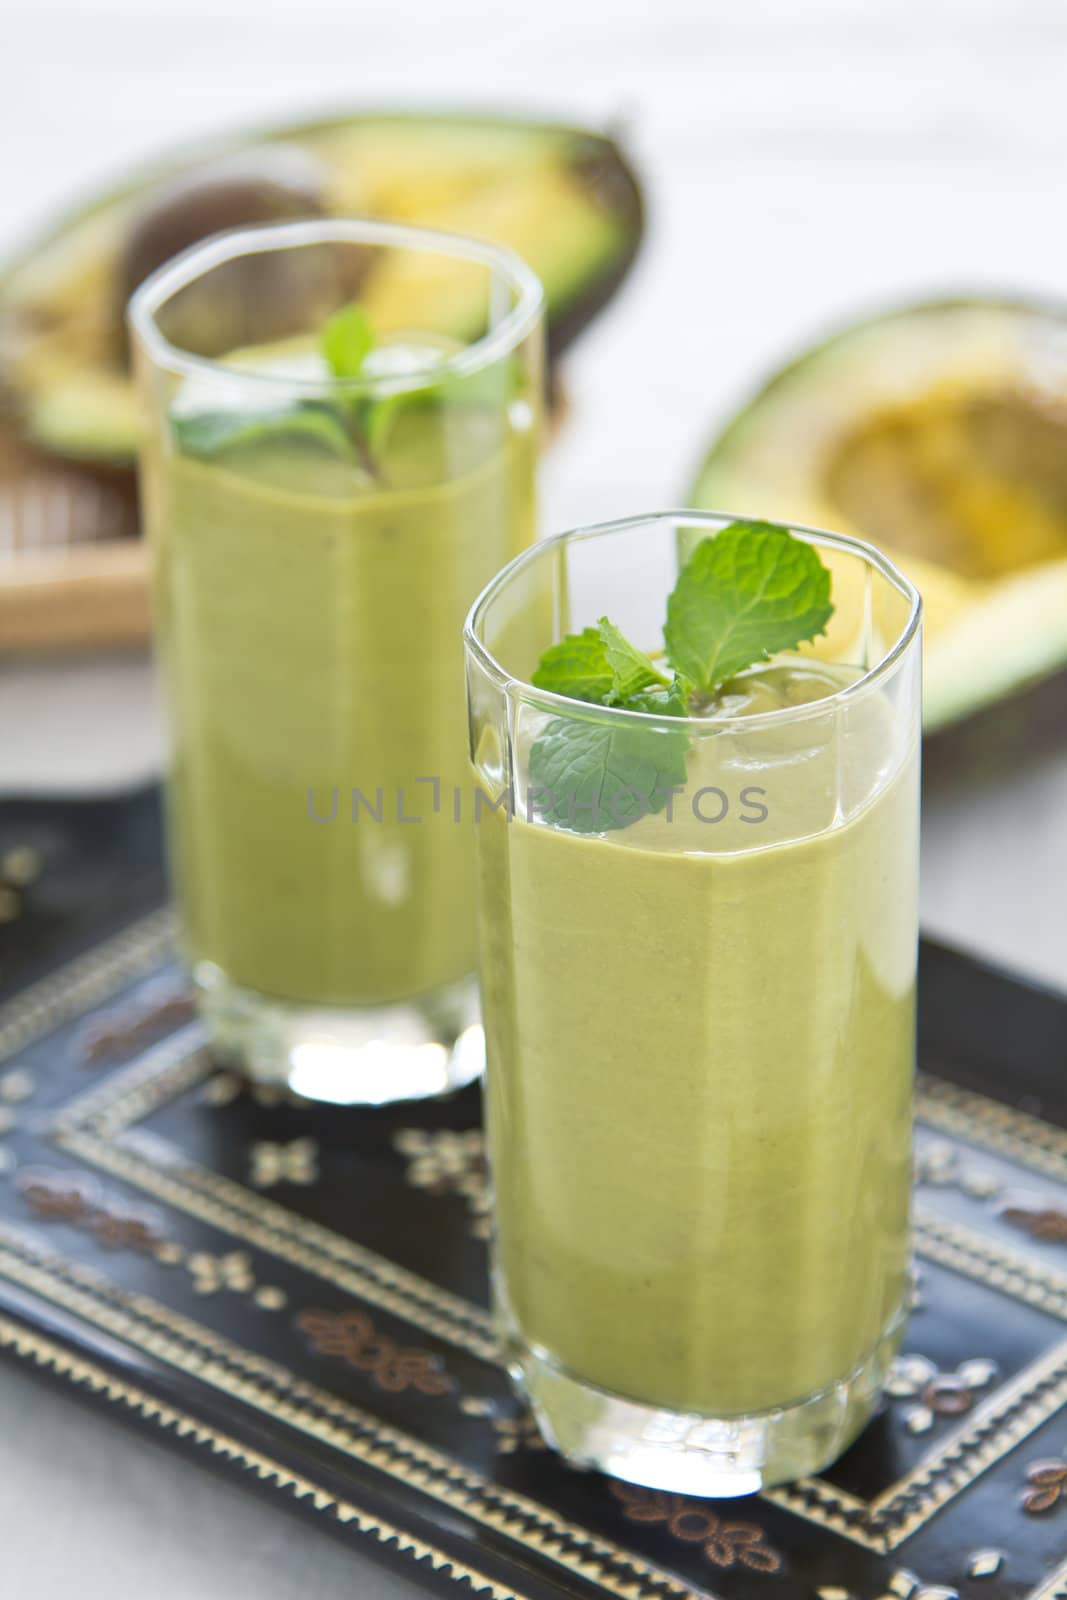 Avocado smoothie by vanillaechoes